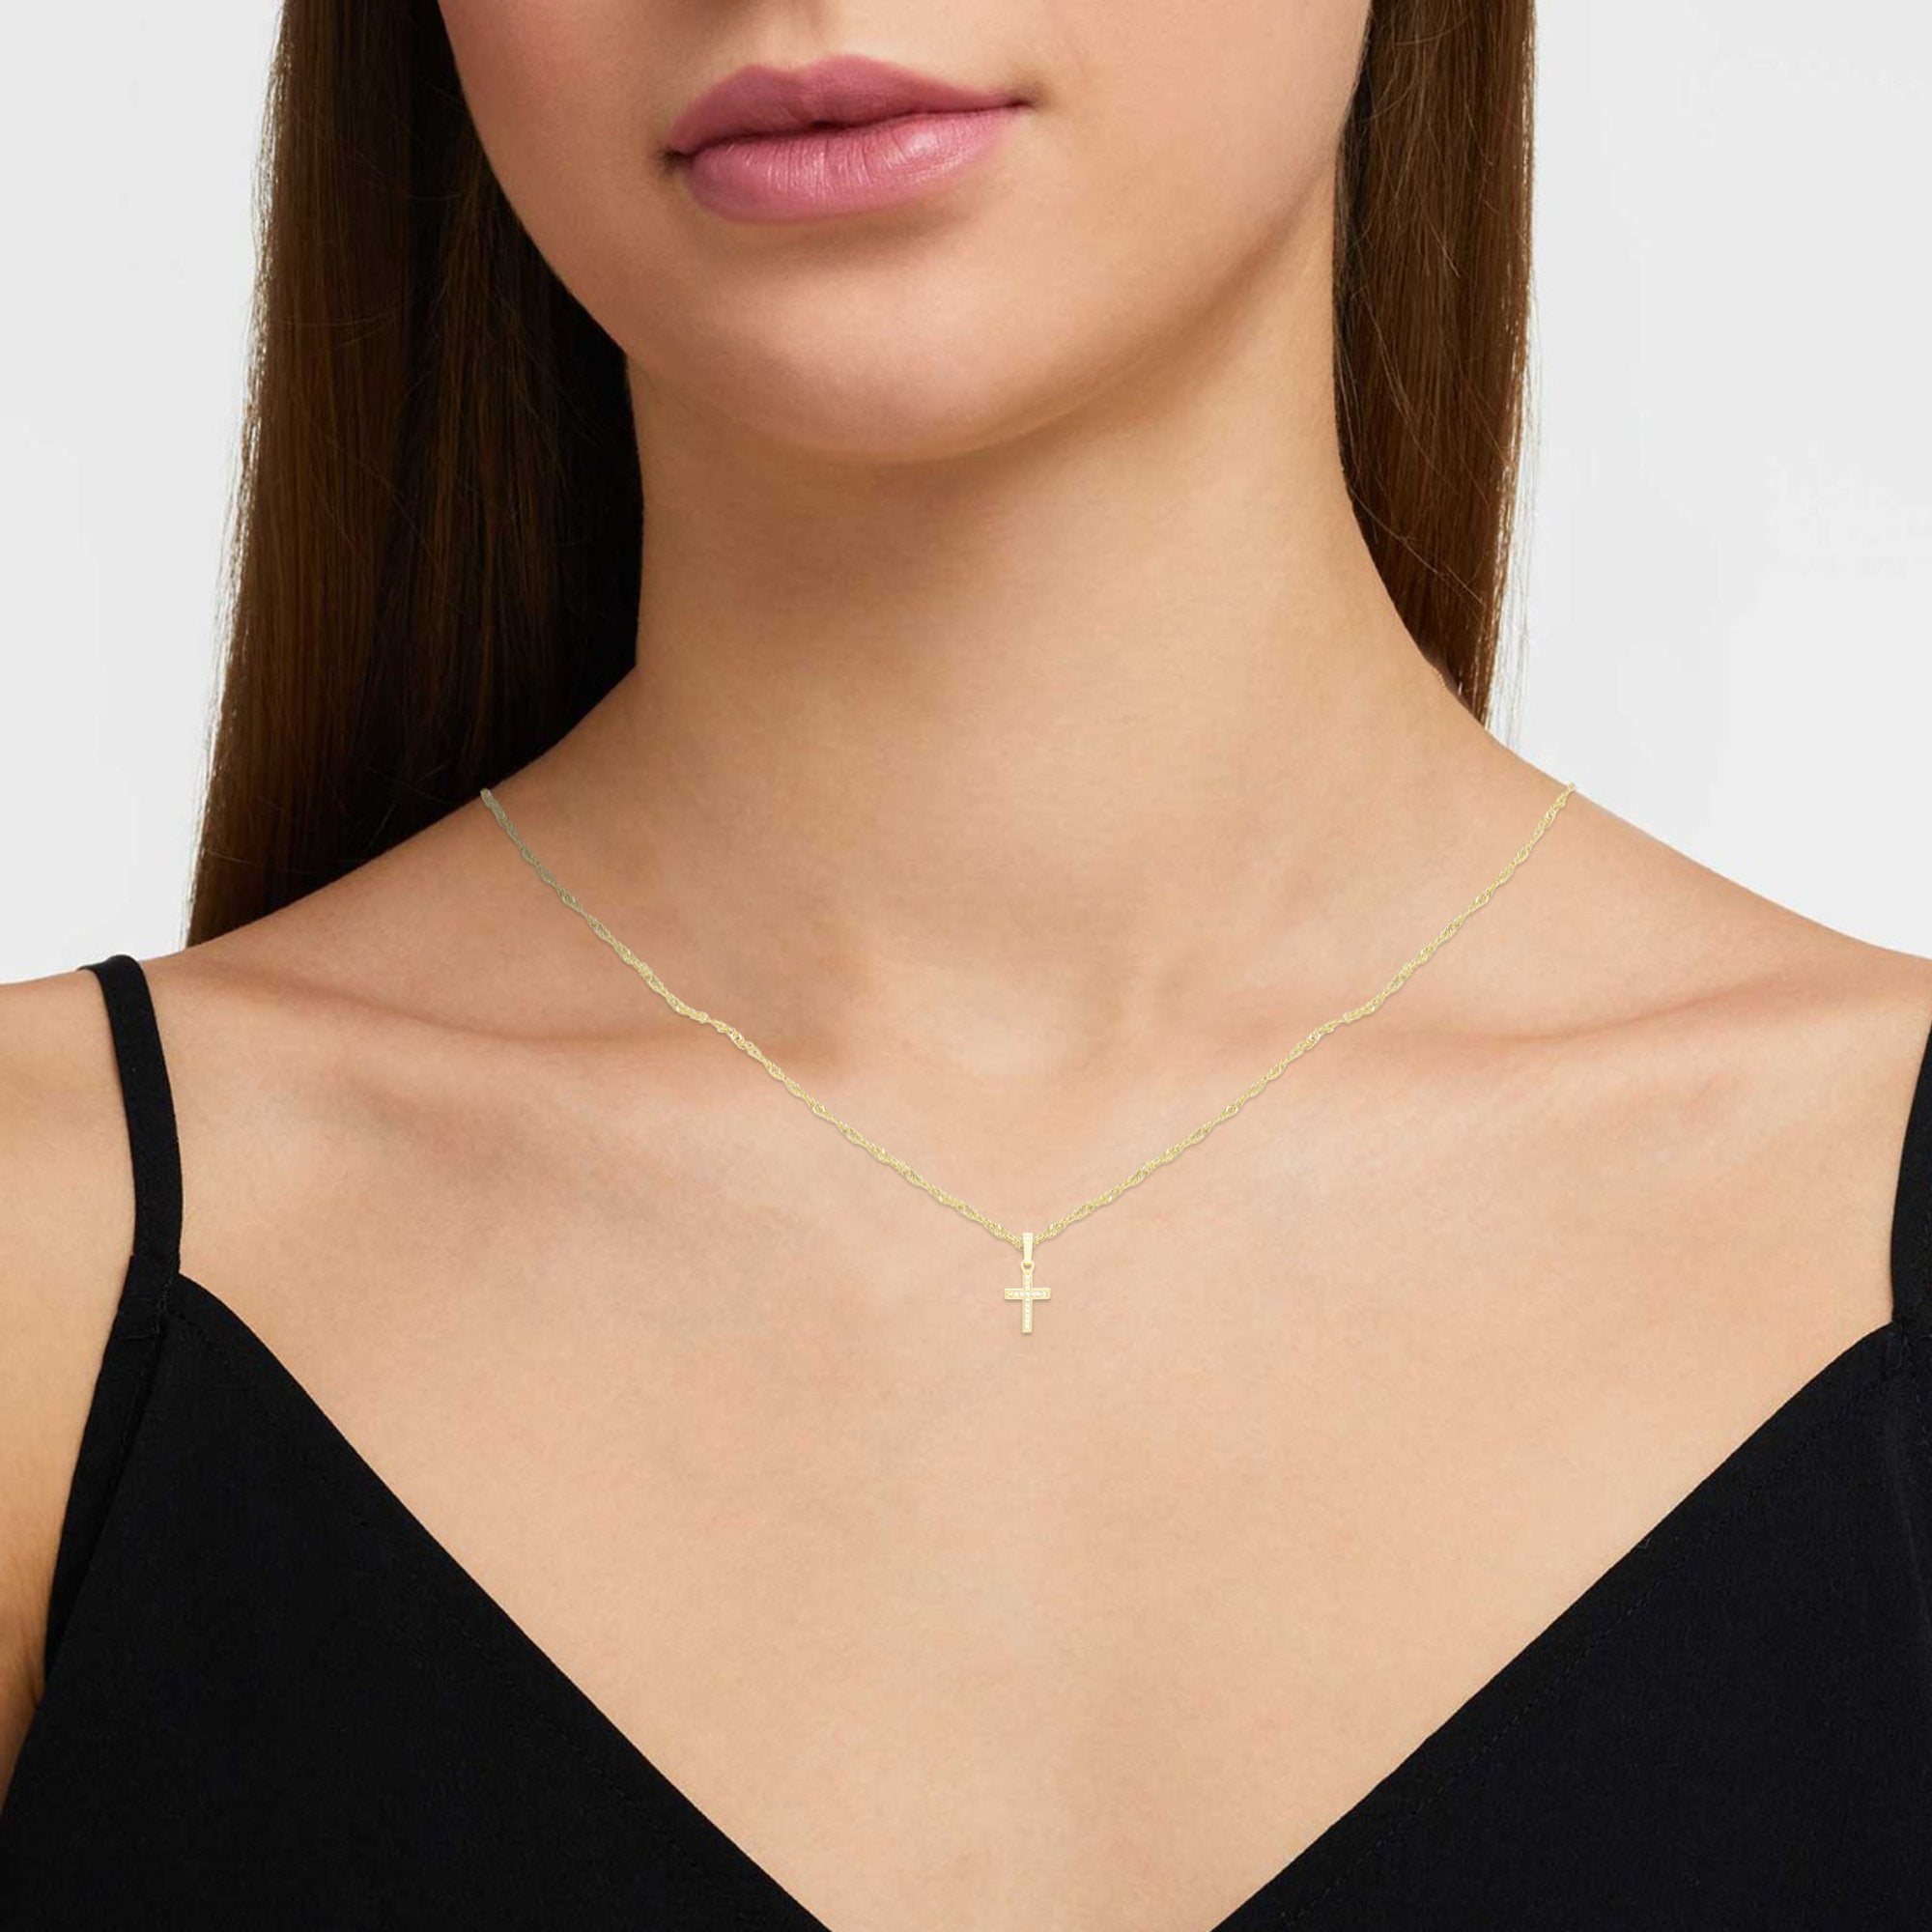 Cross Cubic Zirconia Pendant With Necklace Set 14K Gold Filled